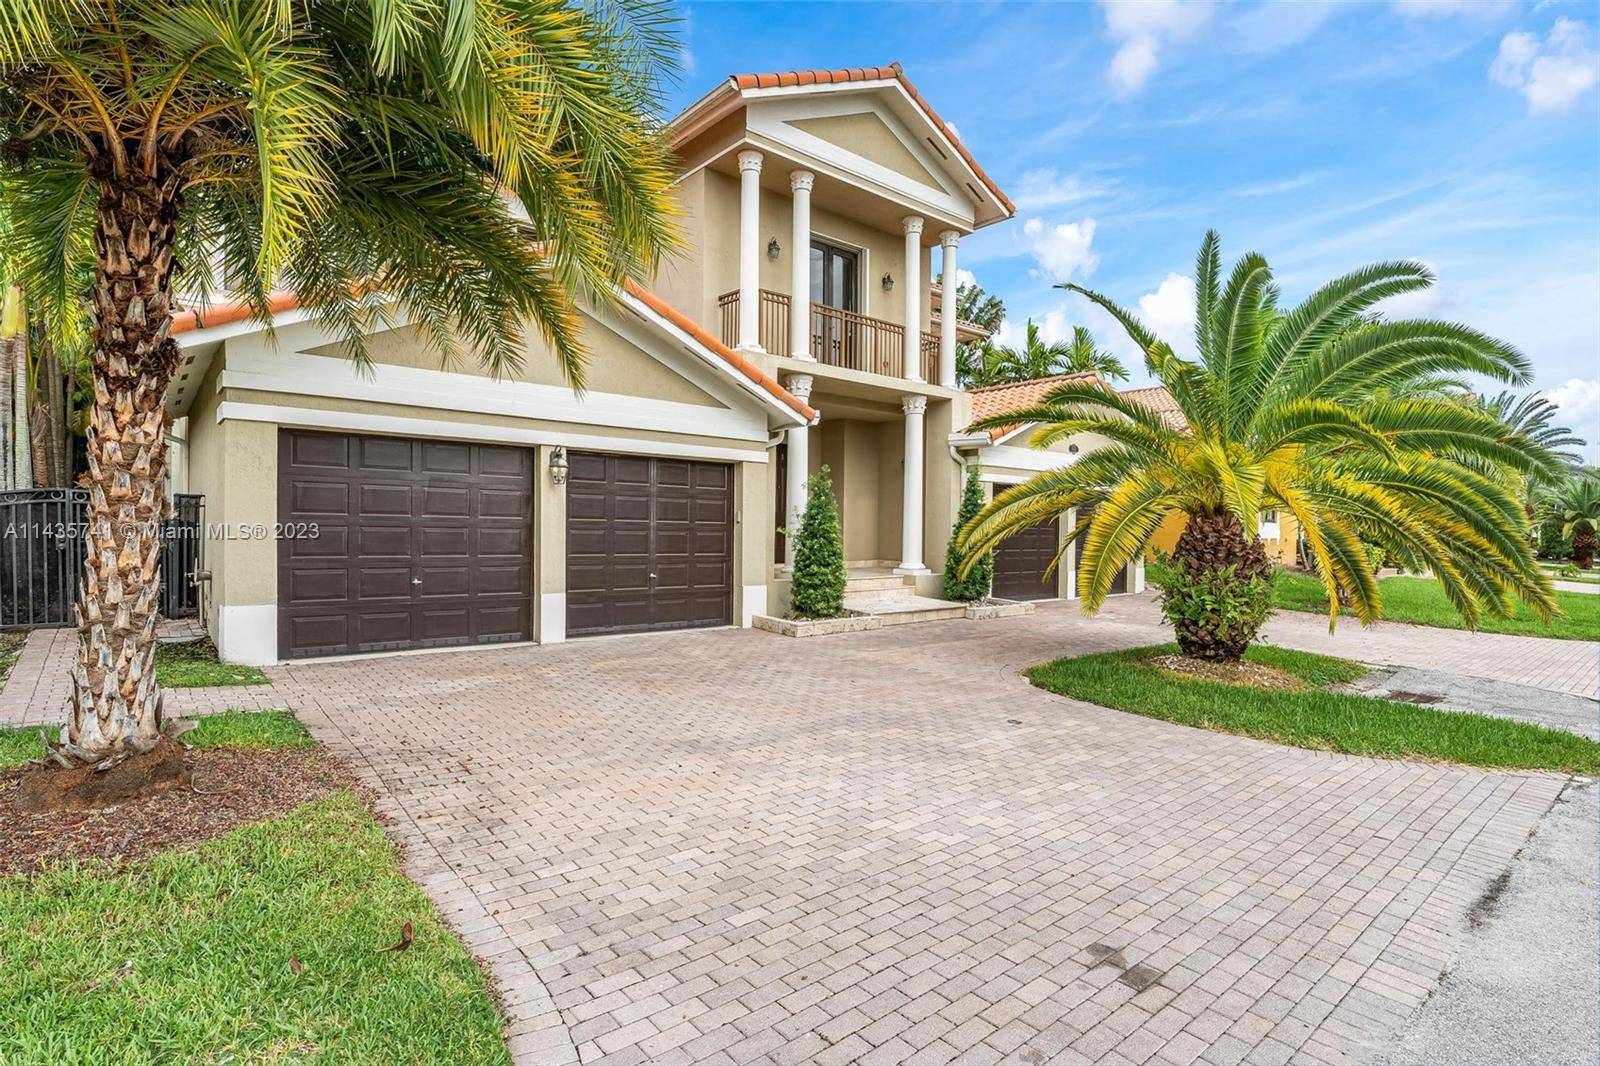 This beautiful two story home is located in the gated community of Cutler Cay.